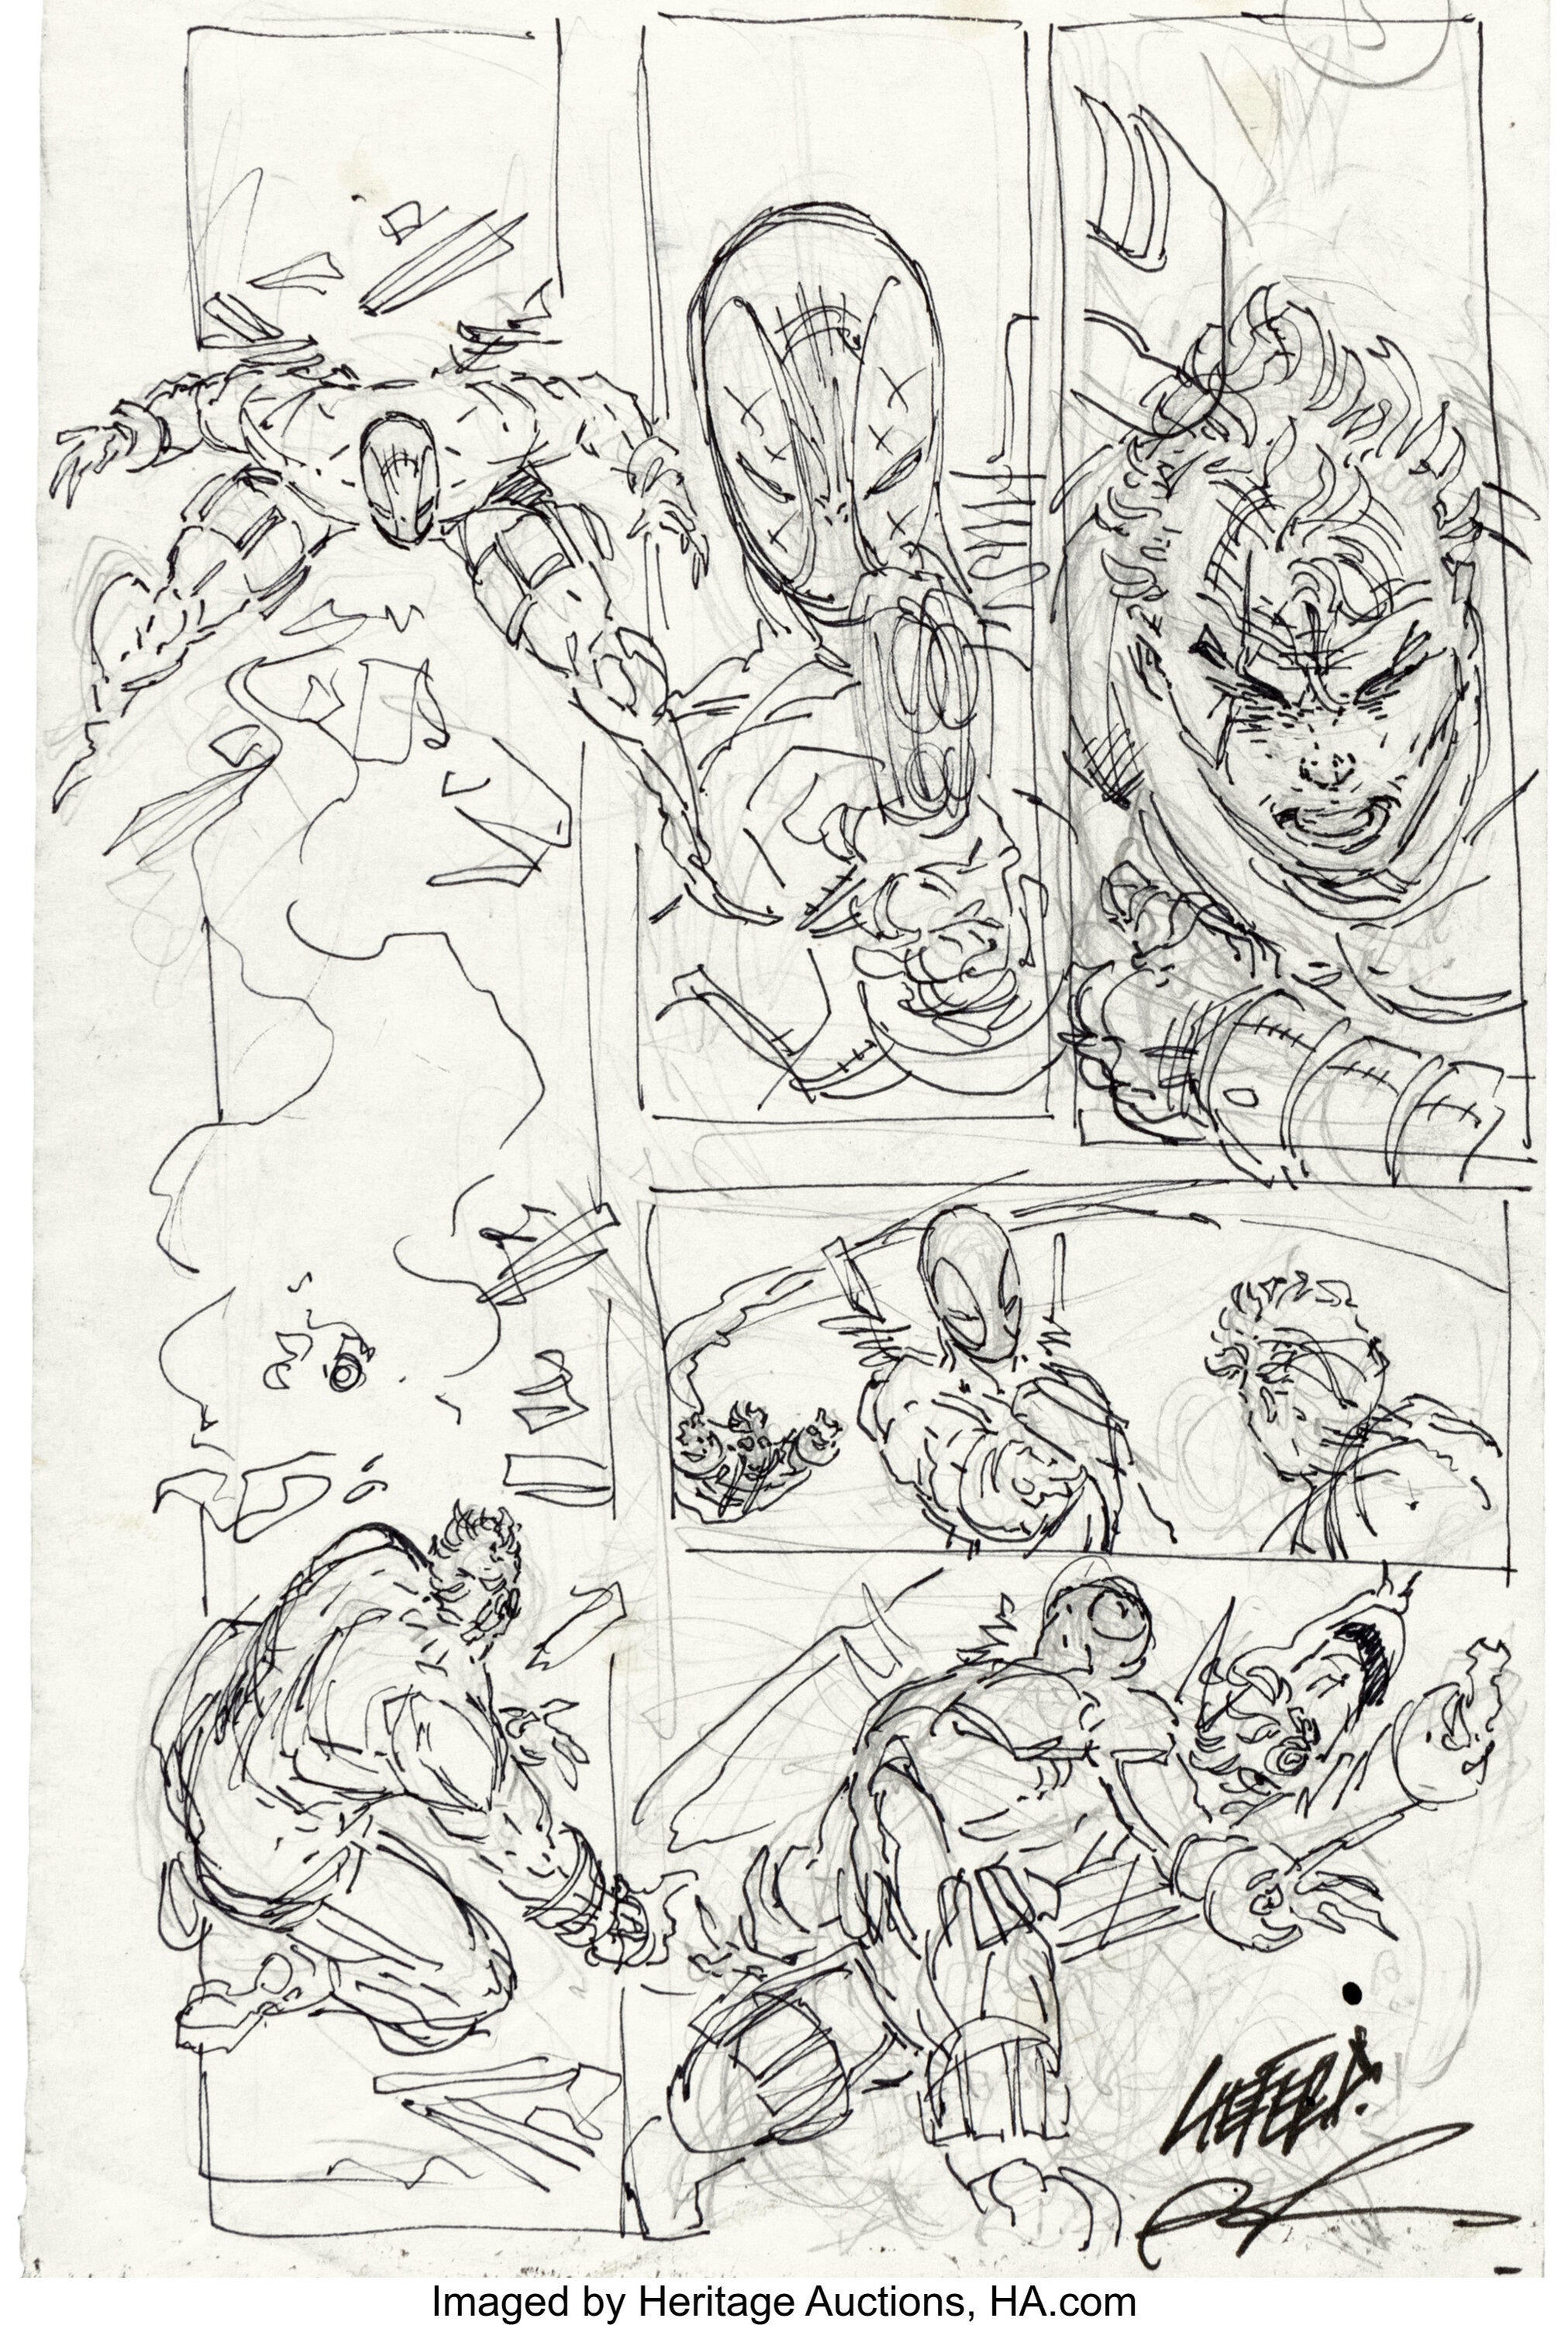 rob-liefeld-the-new-mutants-98-story-page-15-deadpools-first-appearance-preliminary-original-art-heritage-auctions.jpg